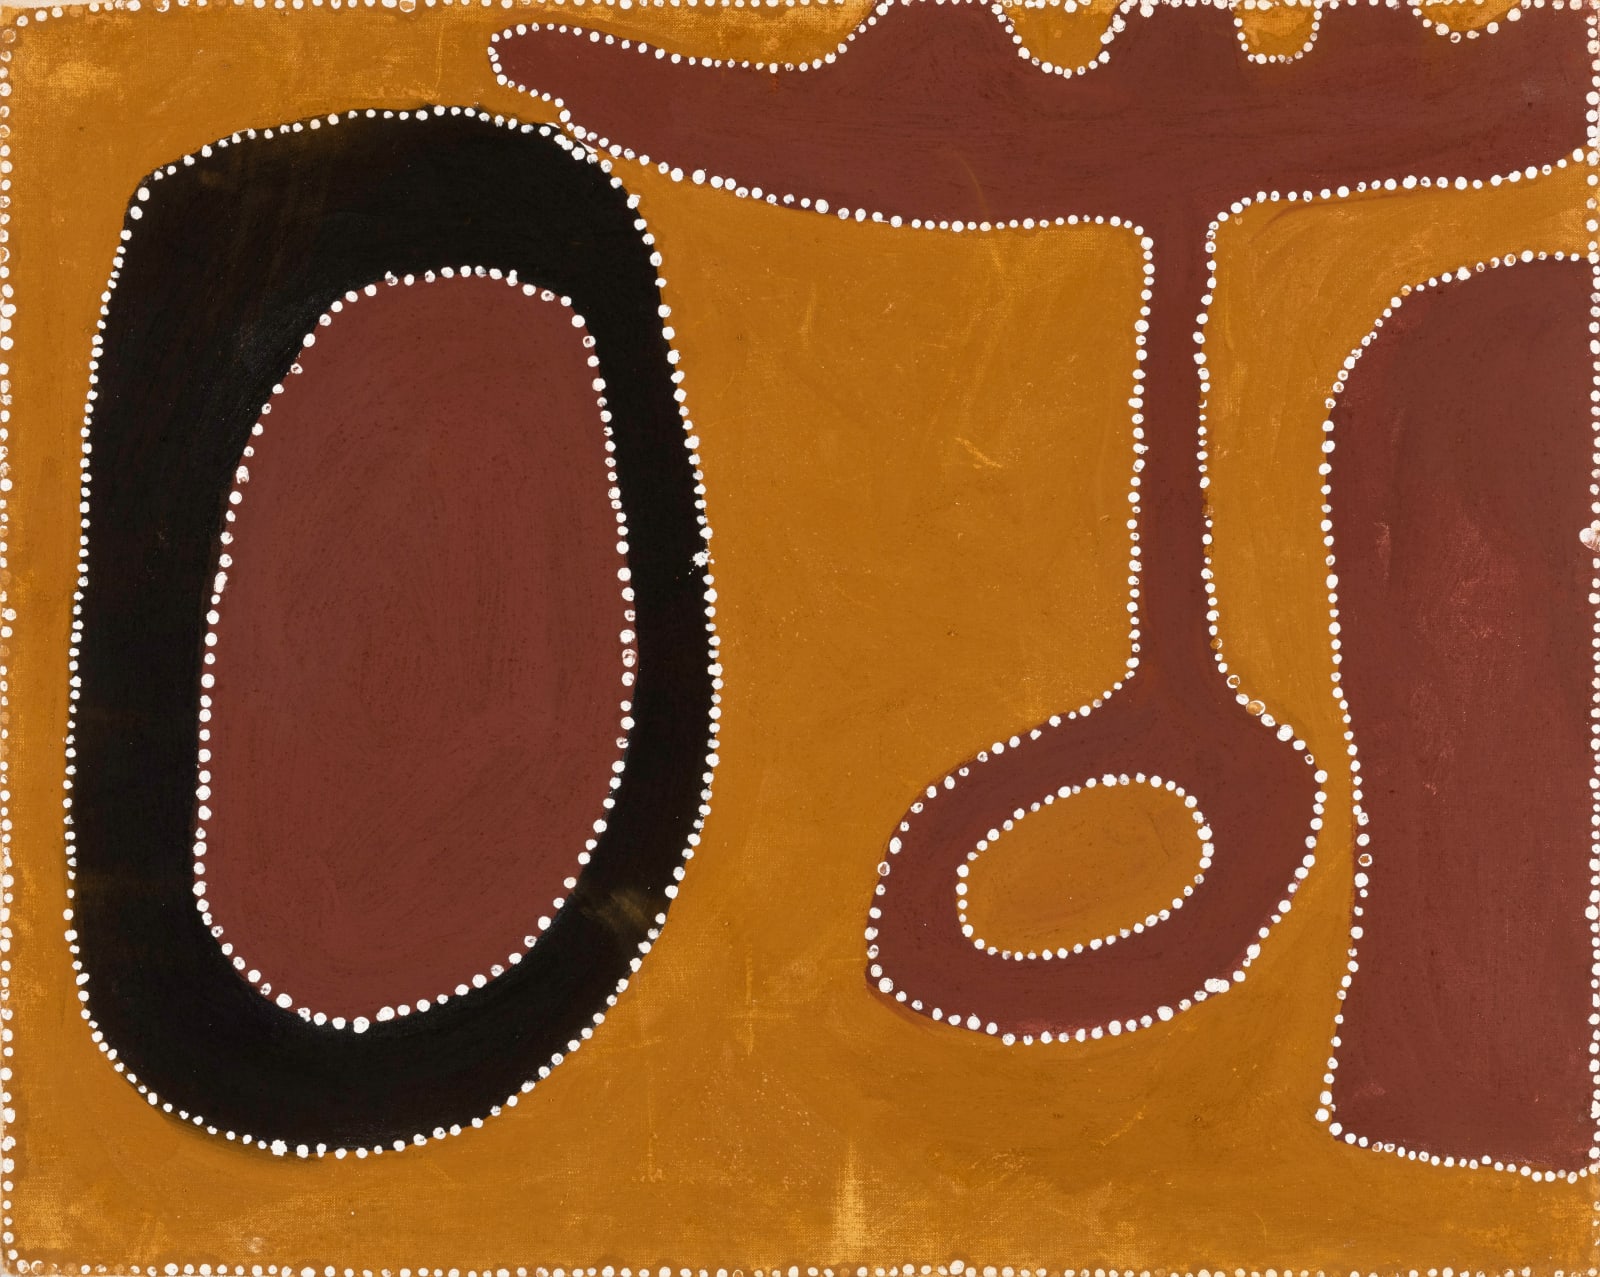 Bush Turkey, 1999 Natural earth pigments and synthetic binders on linen 31 1/2 x 39 3/8 in. (80 x 100 cm.) (PB 31) $65,000 HOLD